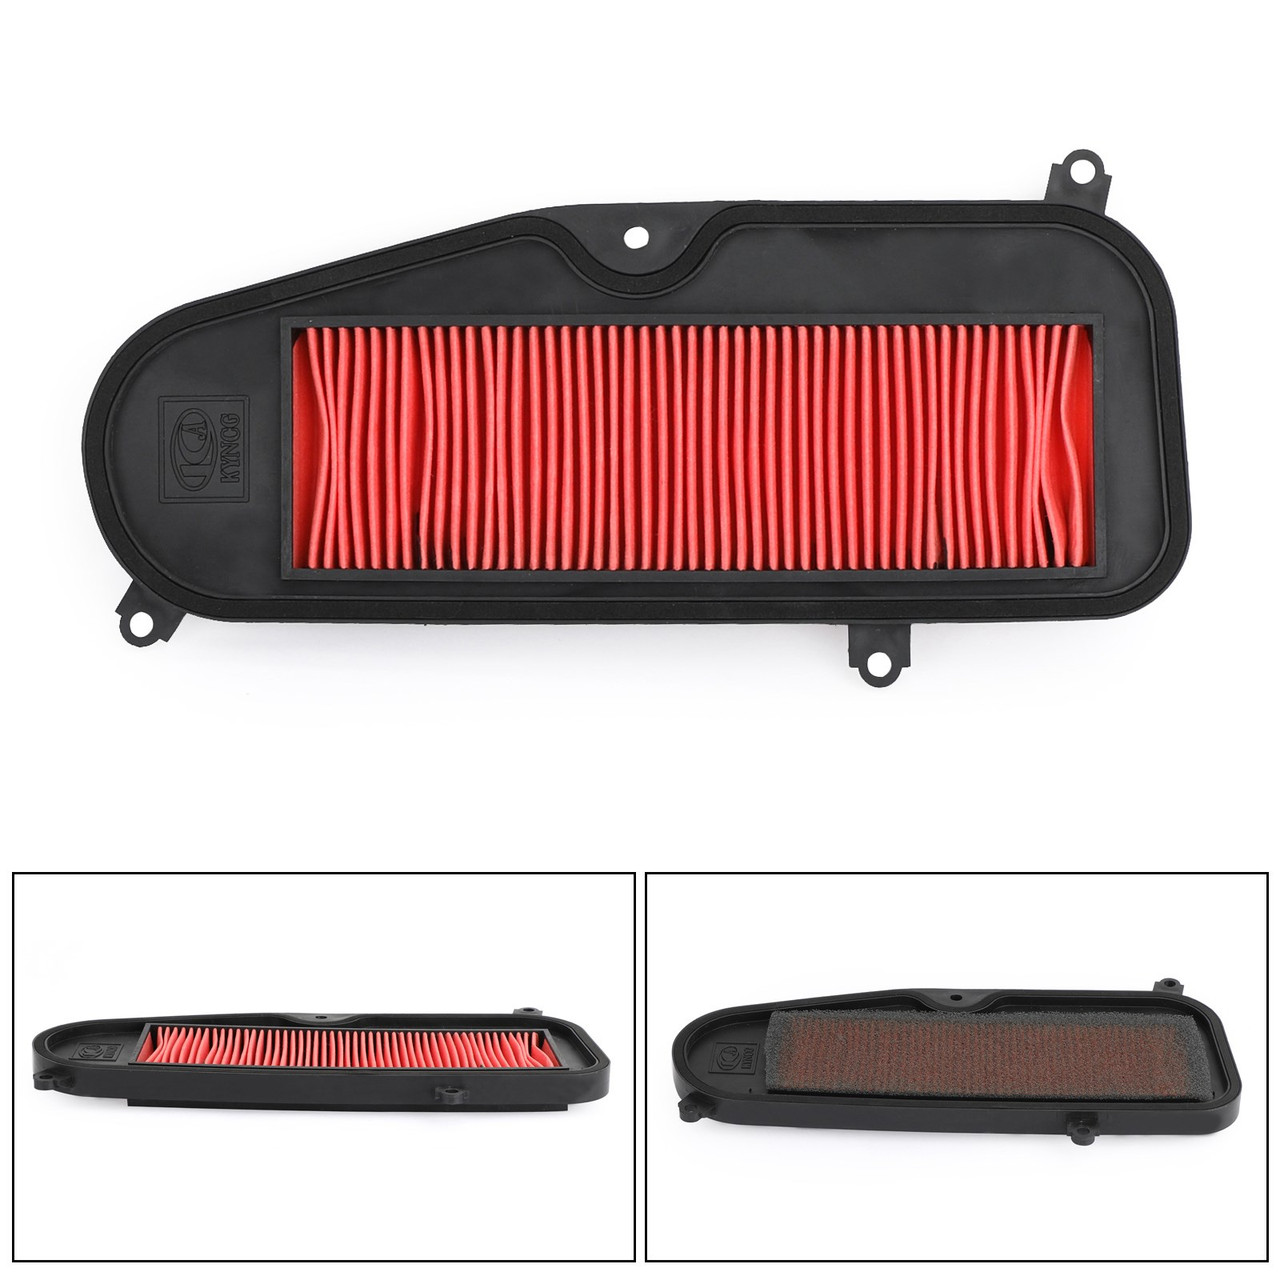 Air Filter Cleaner Element Replacement For KYMCO Dink Classic/E2 125 02-06 Dink LX 125 97-02 Classic/E2 150 Classic 200 02-07 150 97-02 Yager125 02-06 Red